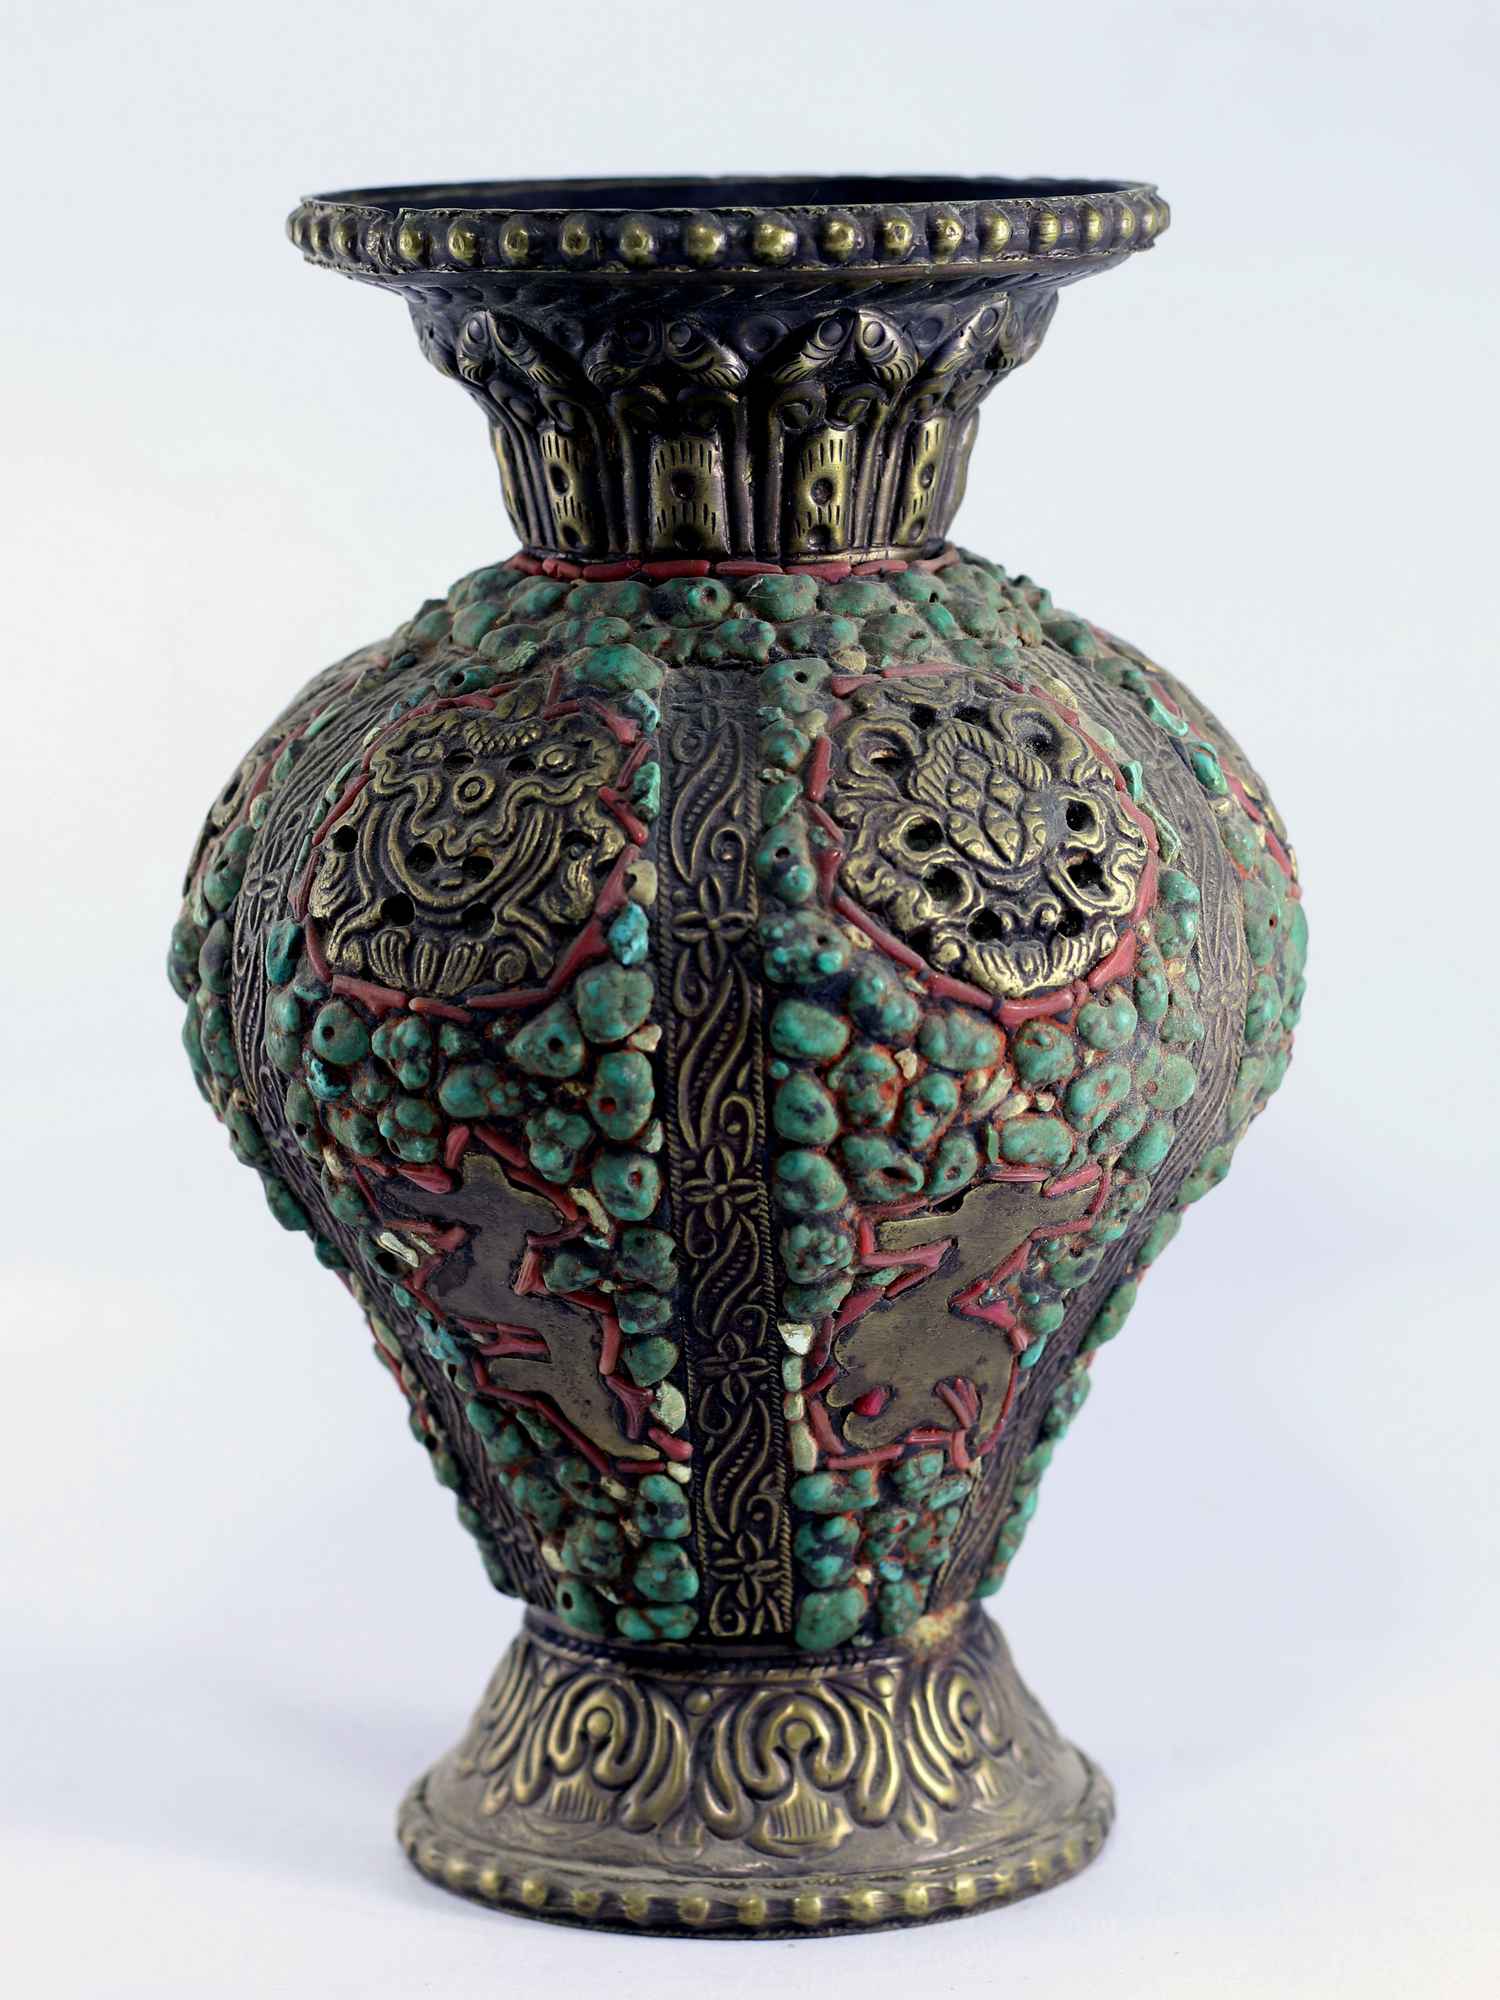 White Metal Tibetan Flower Vase : Vase With real Turquoise And Other Stones